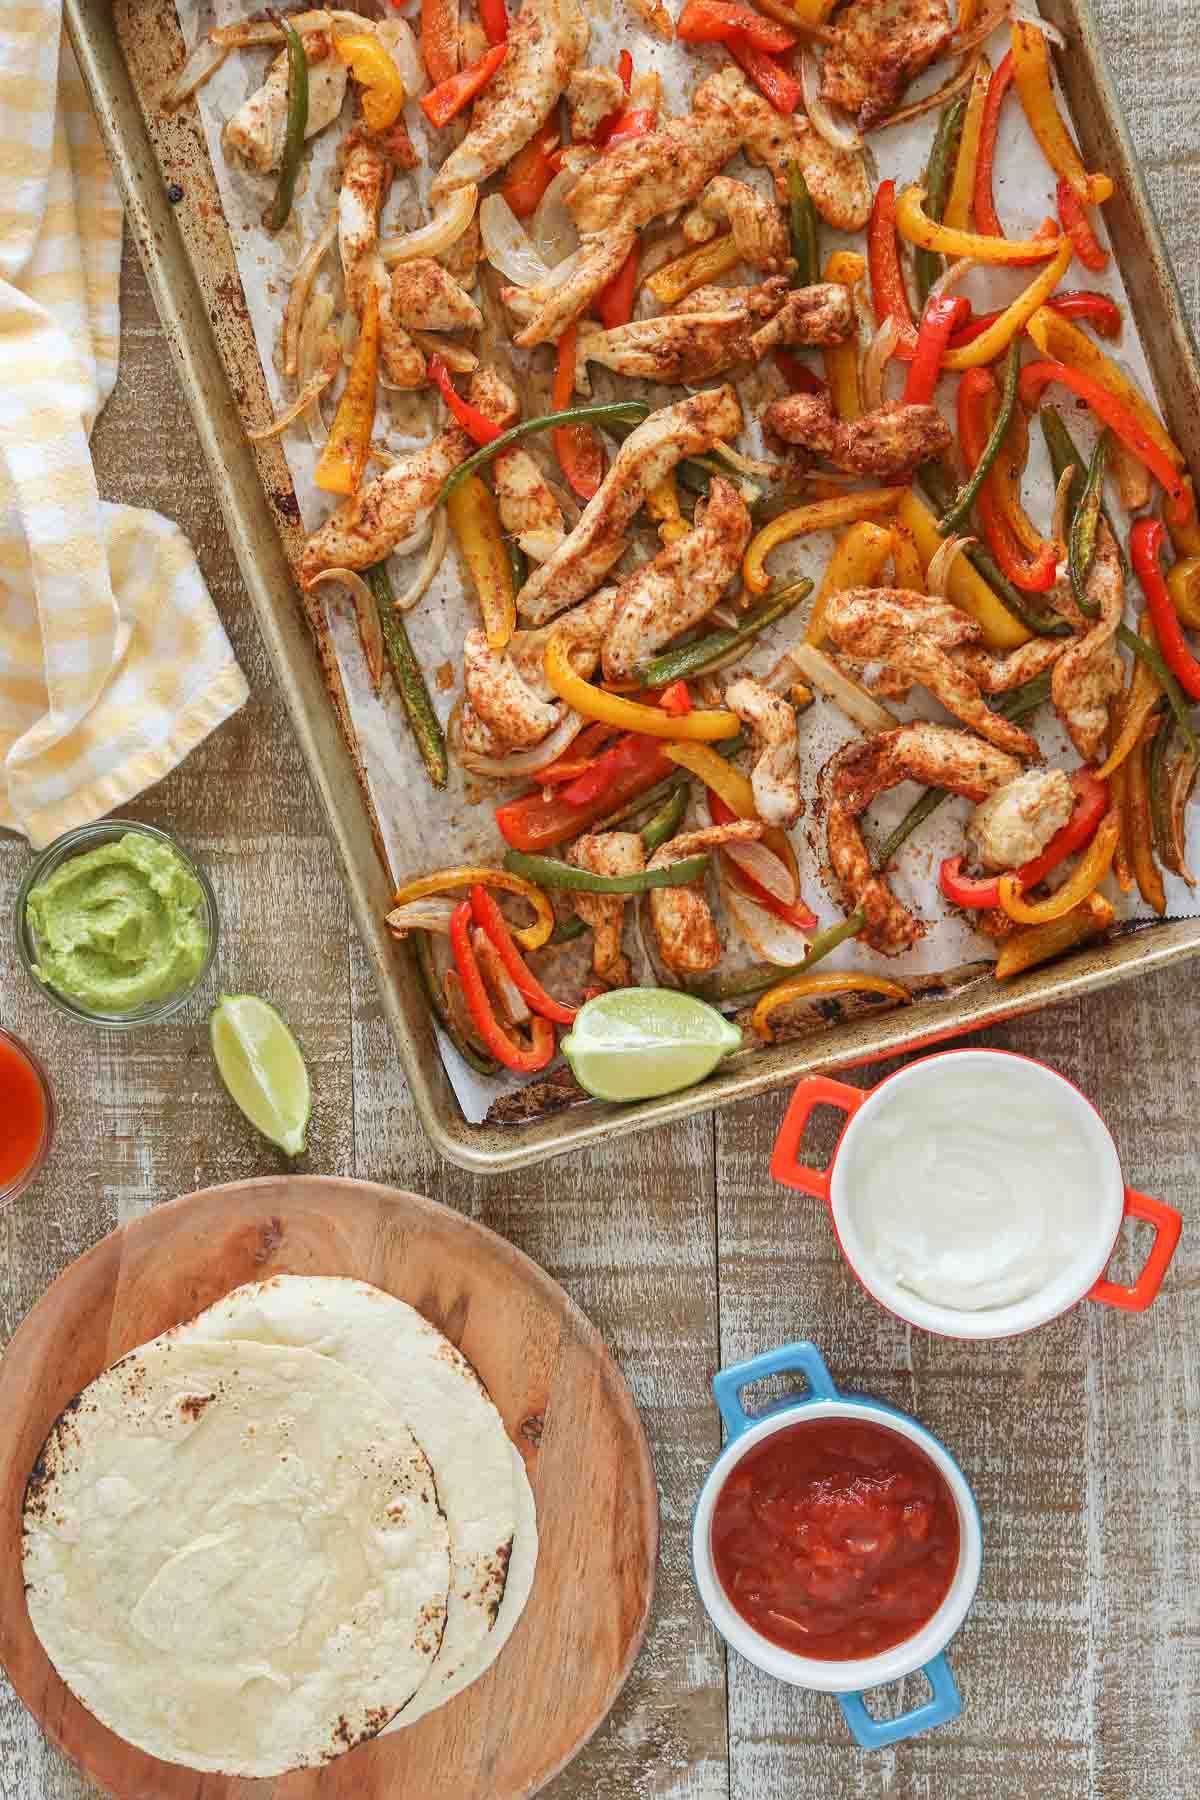 Cooked seasoned chicken, onion and peppers for fajitas on a sheet pan next to tortillas & toppings.